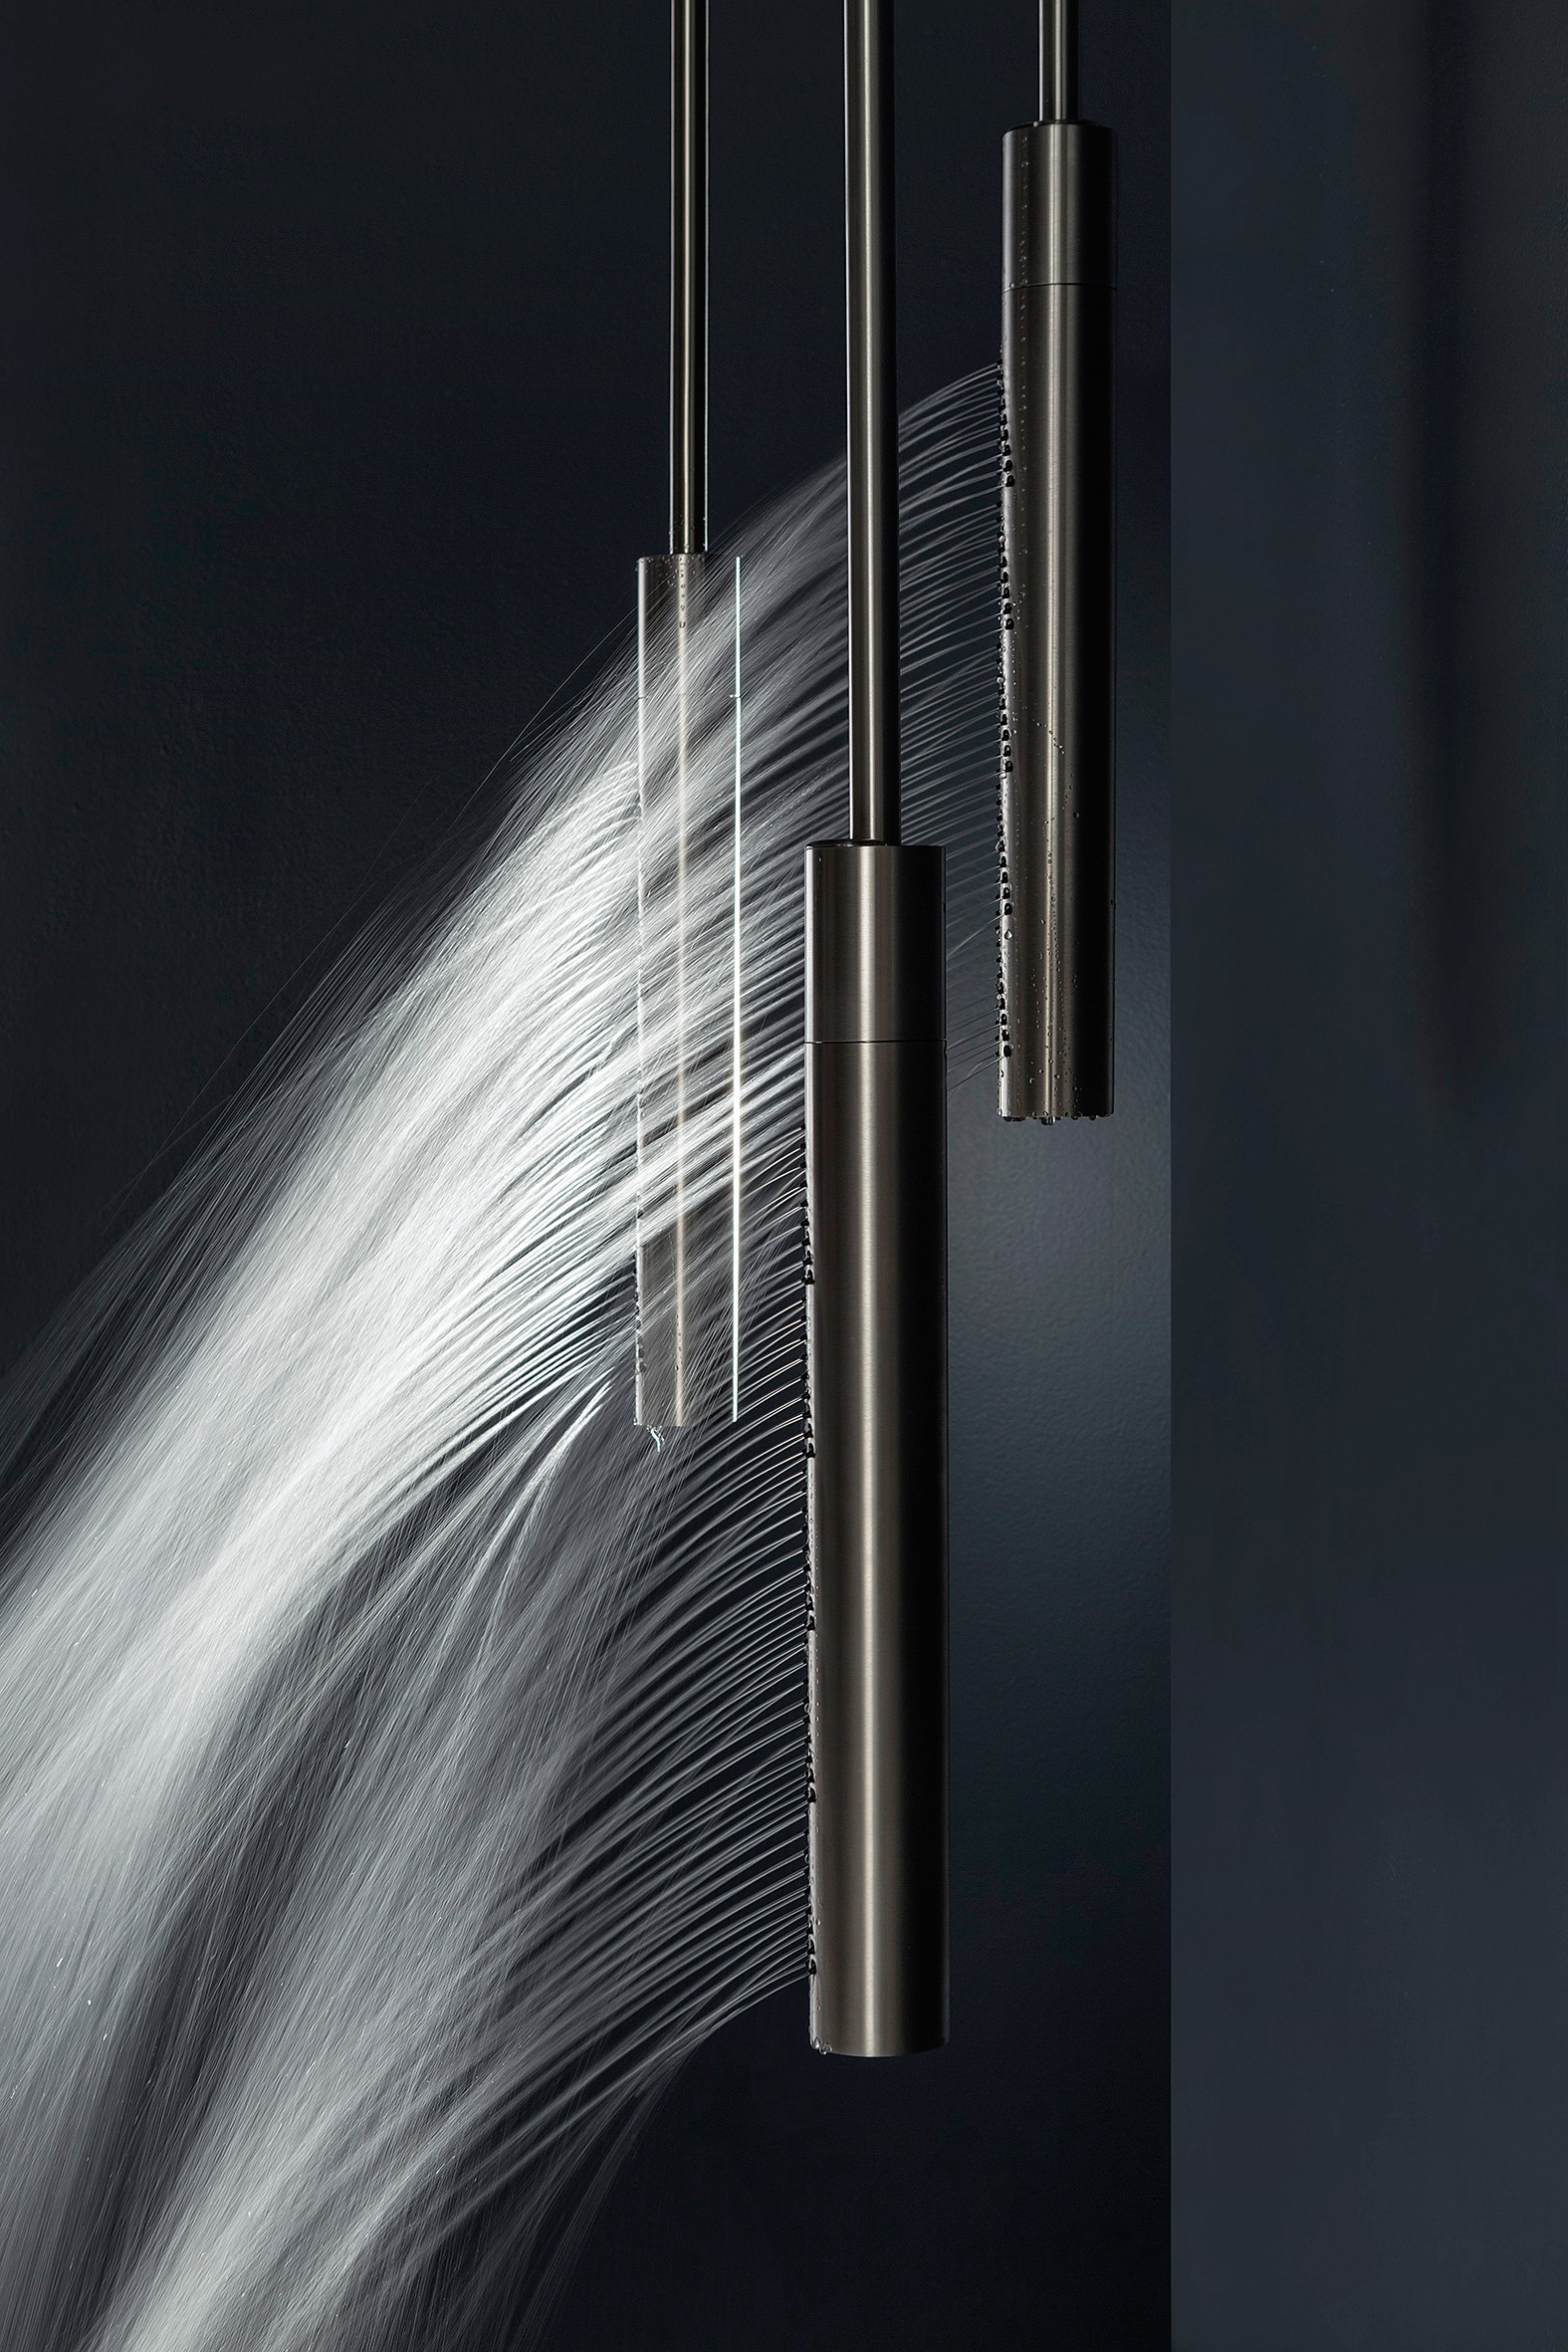 Great success at the Salone del Mobile for the new Z316 shower heads